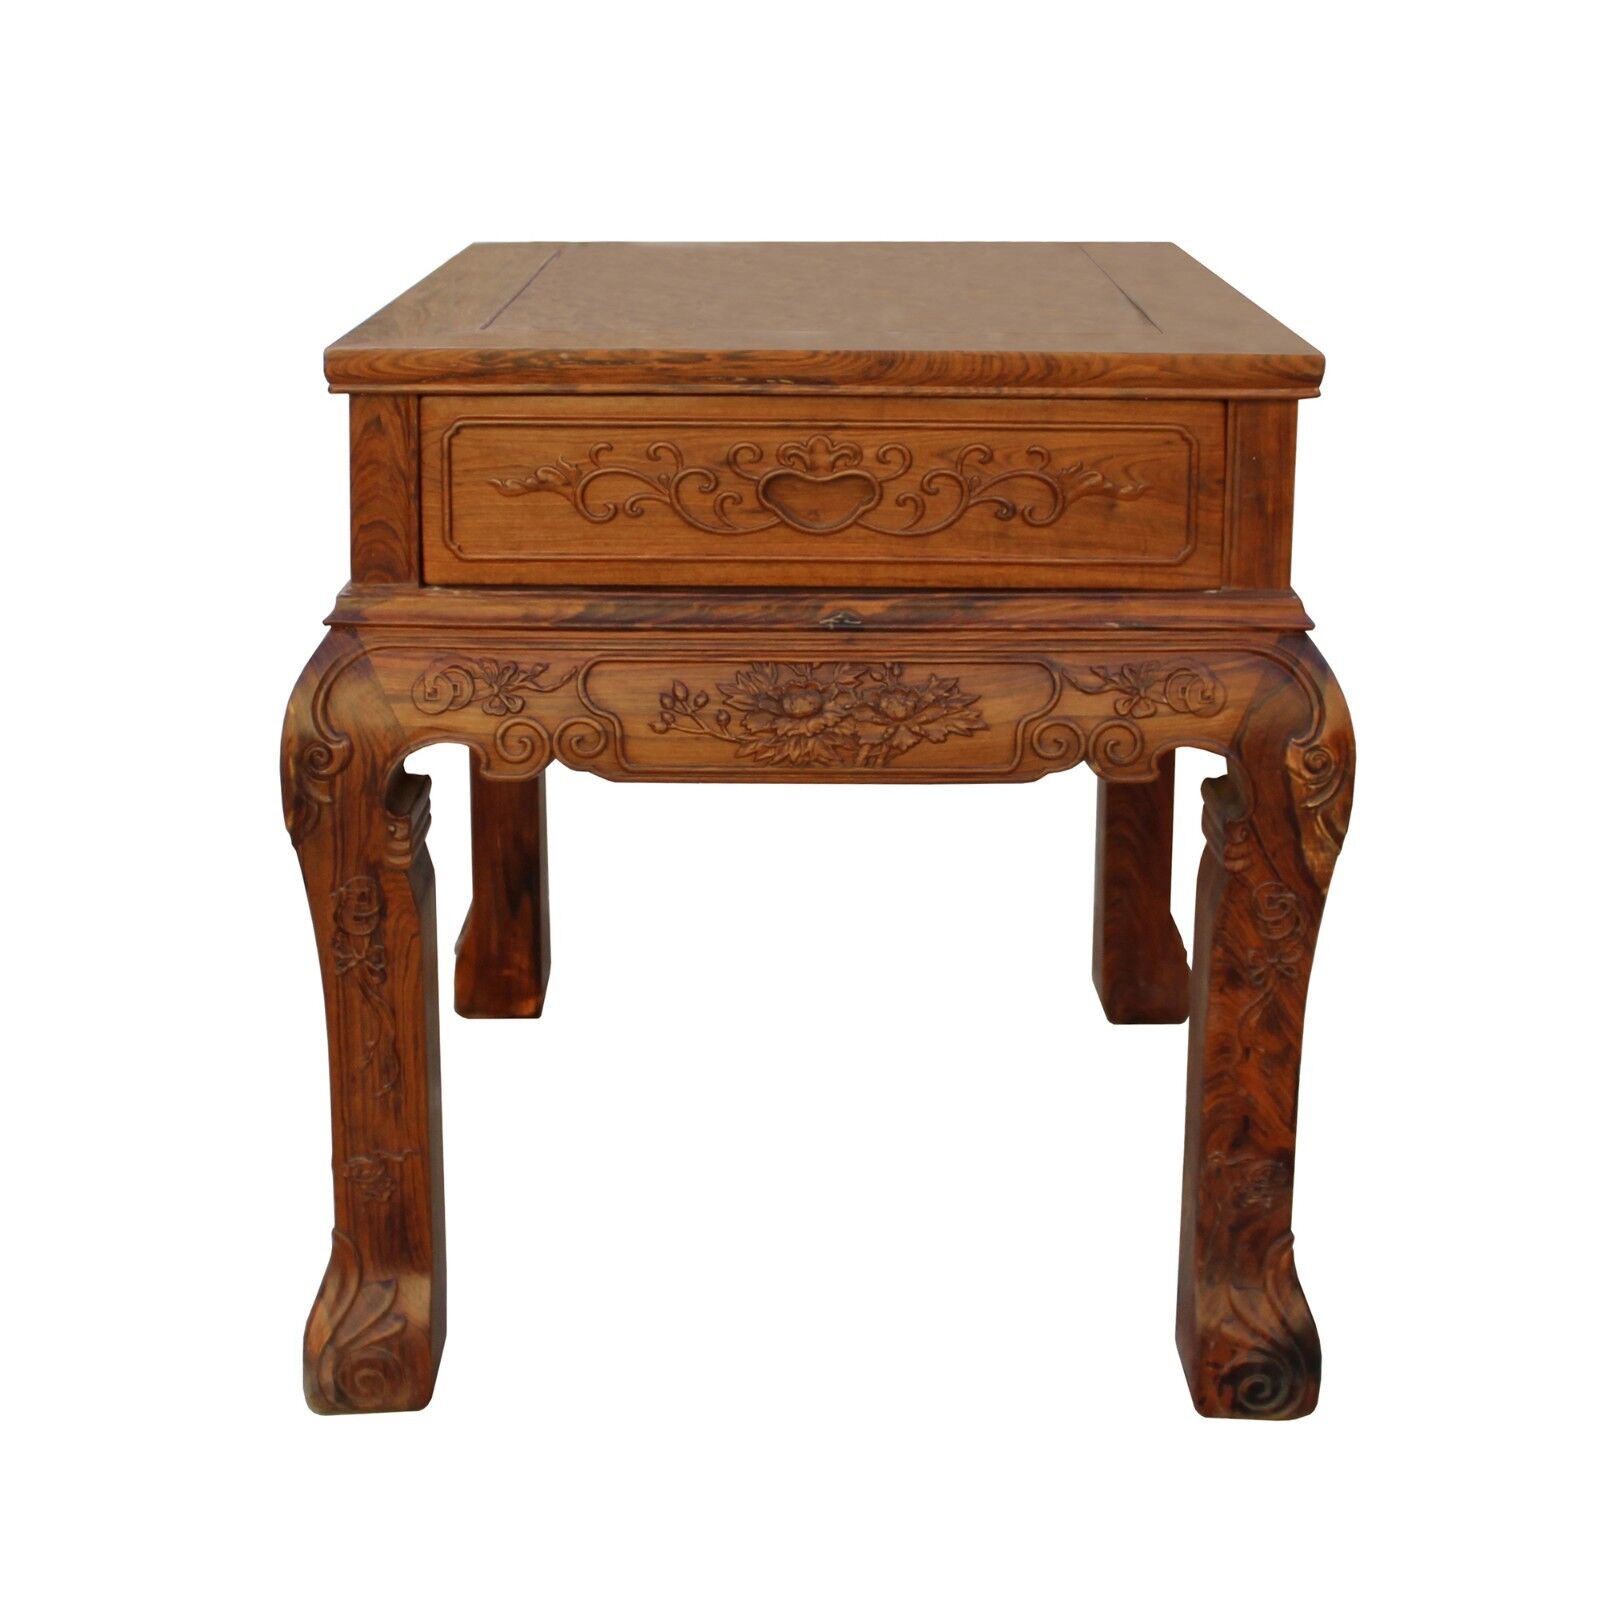 Chinese Oriental Huali Rosewood Flower Motif Tea Table Stand cs4578 Handmade Does Not Apply